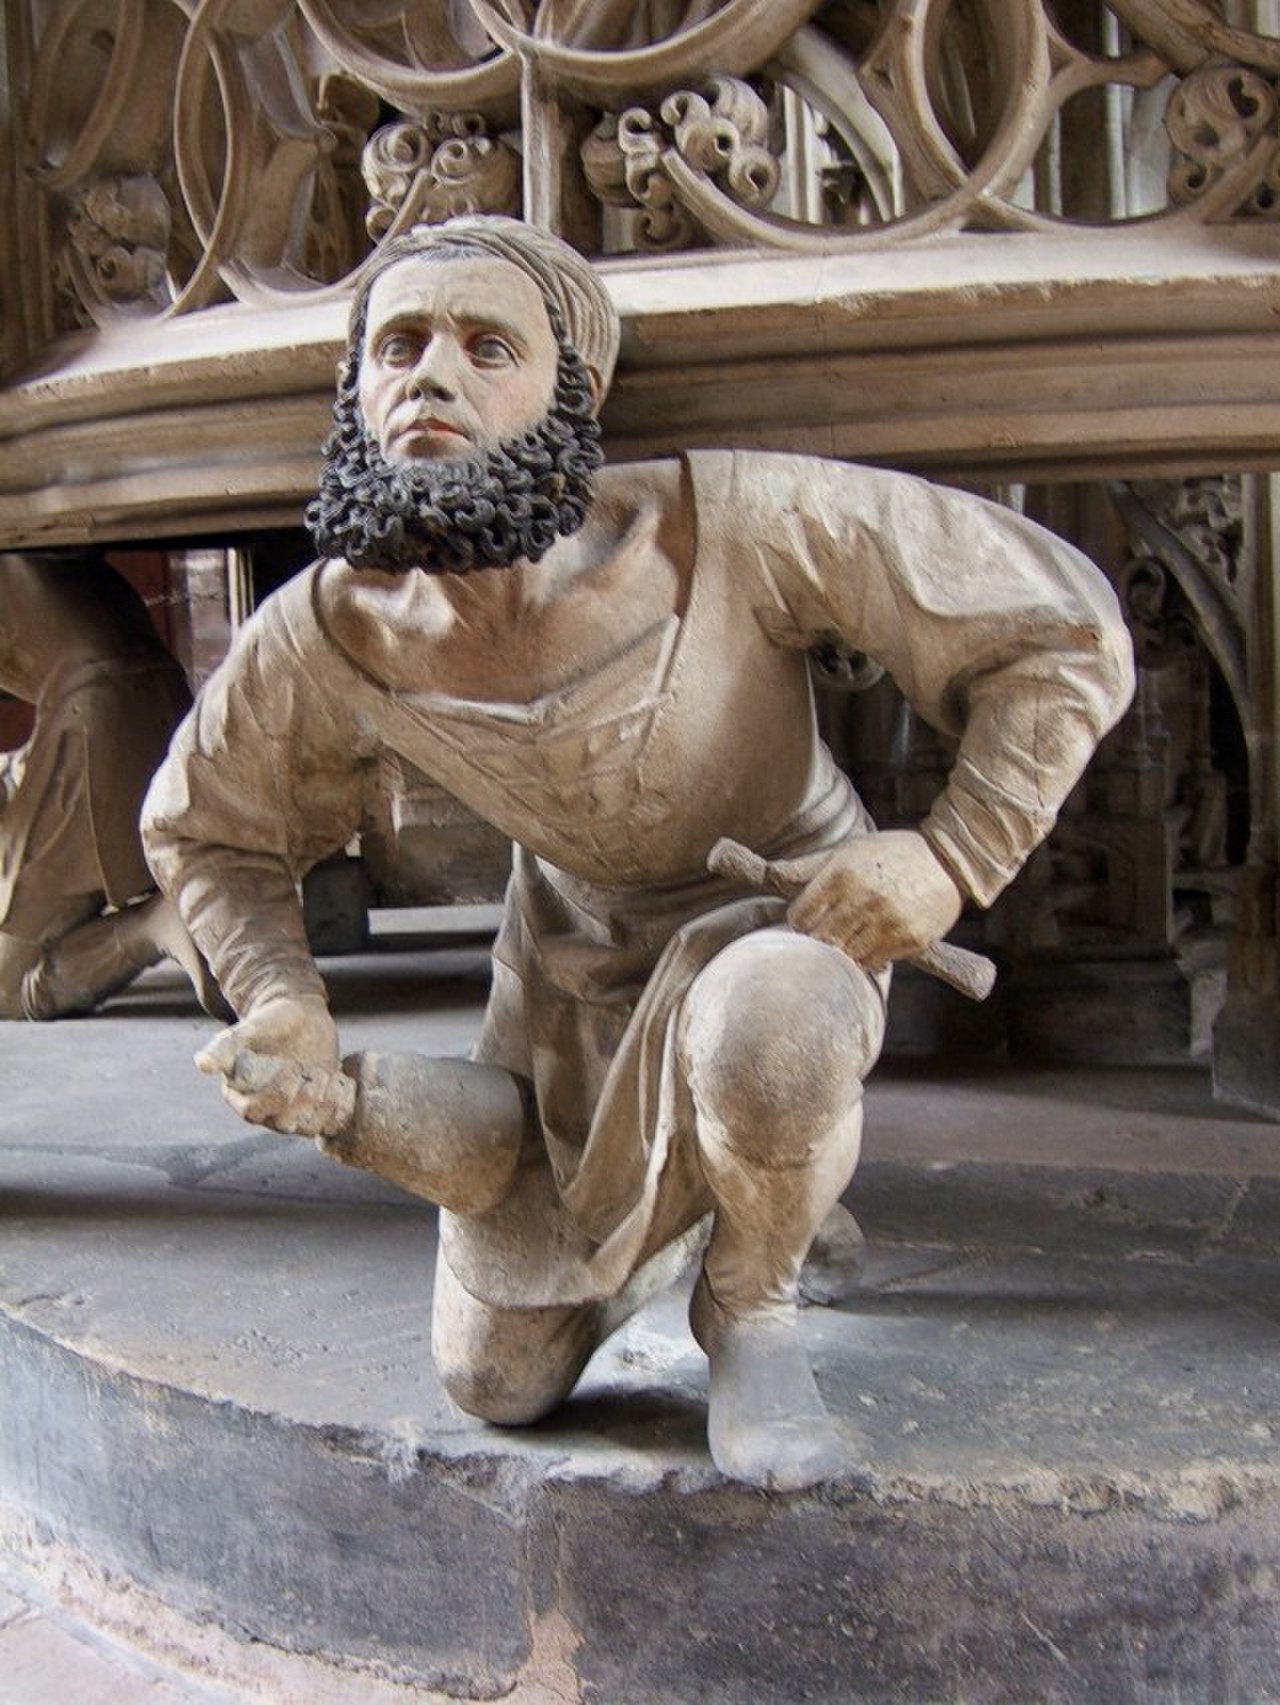 Self portrait of the sculptor Adam Kraft (1490s) at his own masterpiece - the tabernacle at the St. Lorenz Church in Nuremberg, Germany.jpg